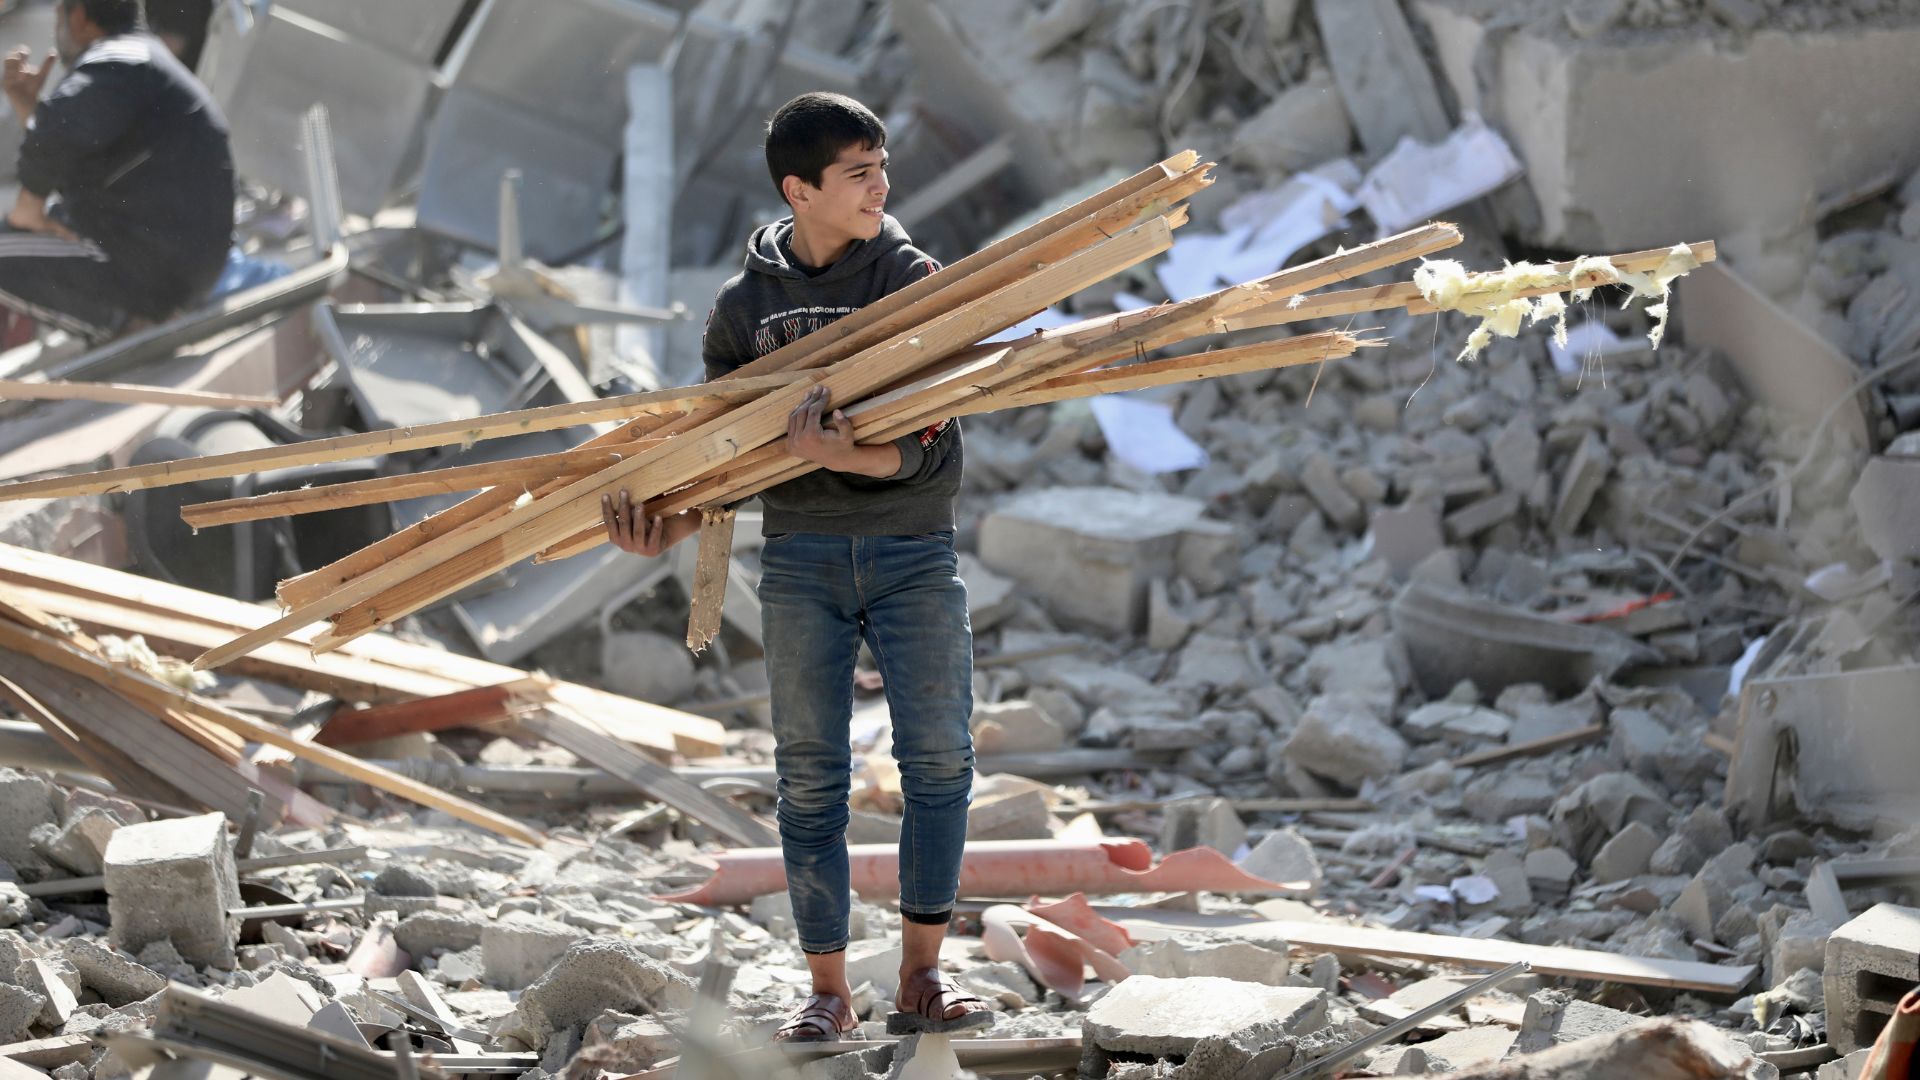 Will it be safe for Palestinians in Gaza to return and rebuild their homes?